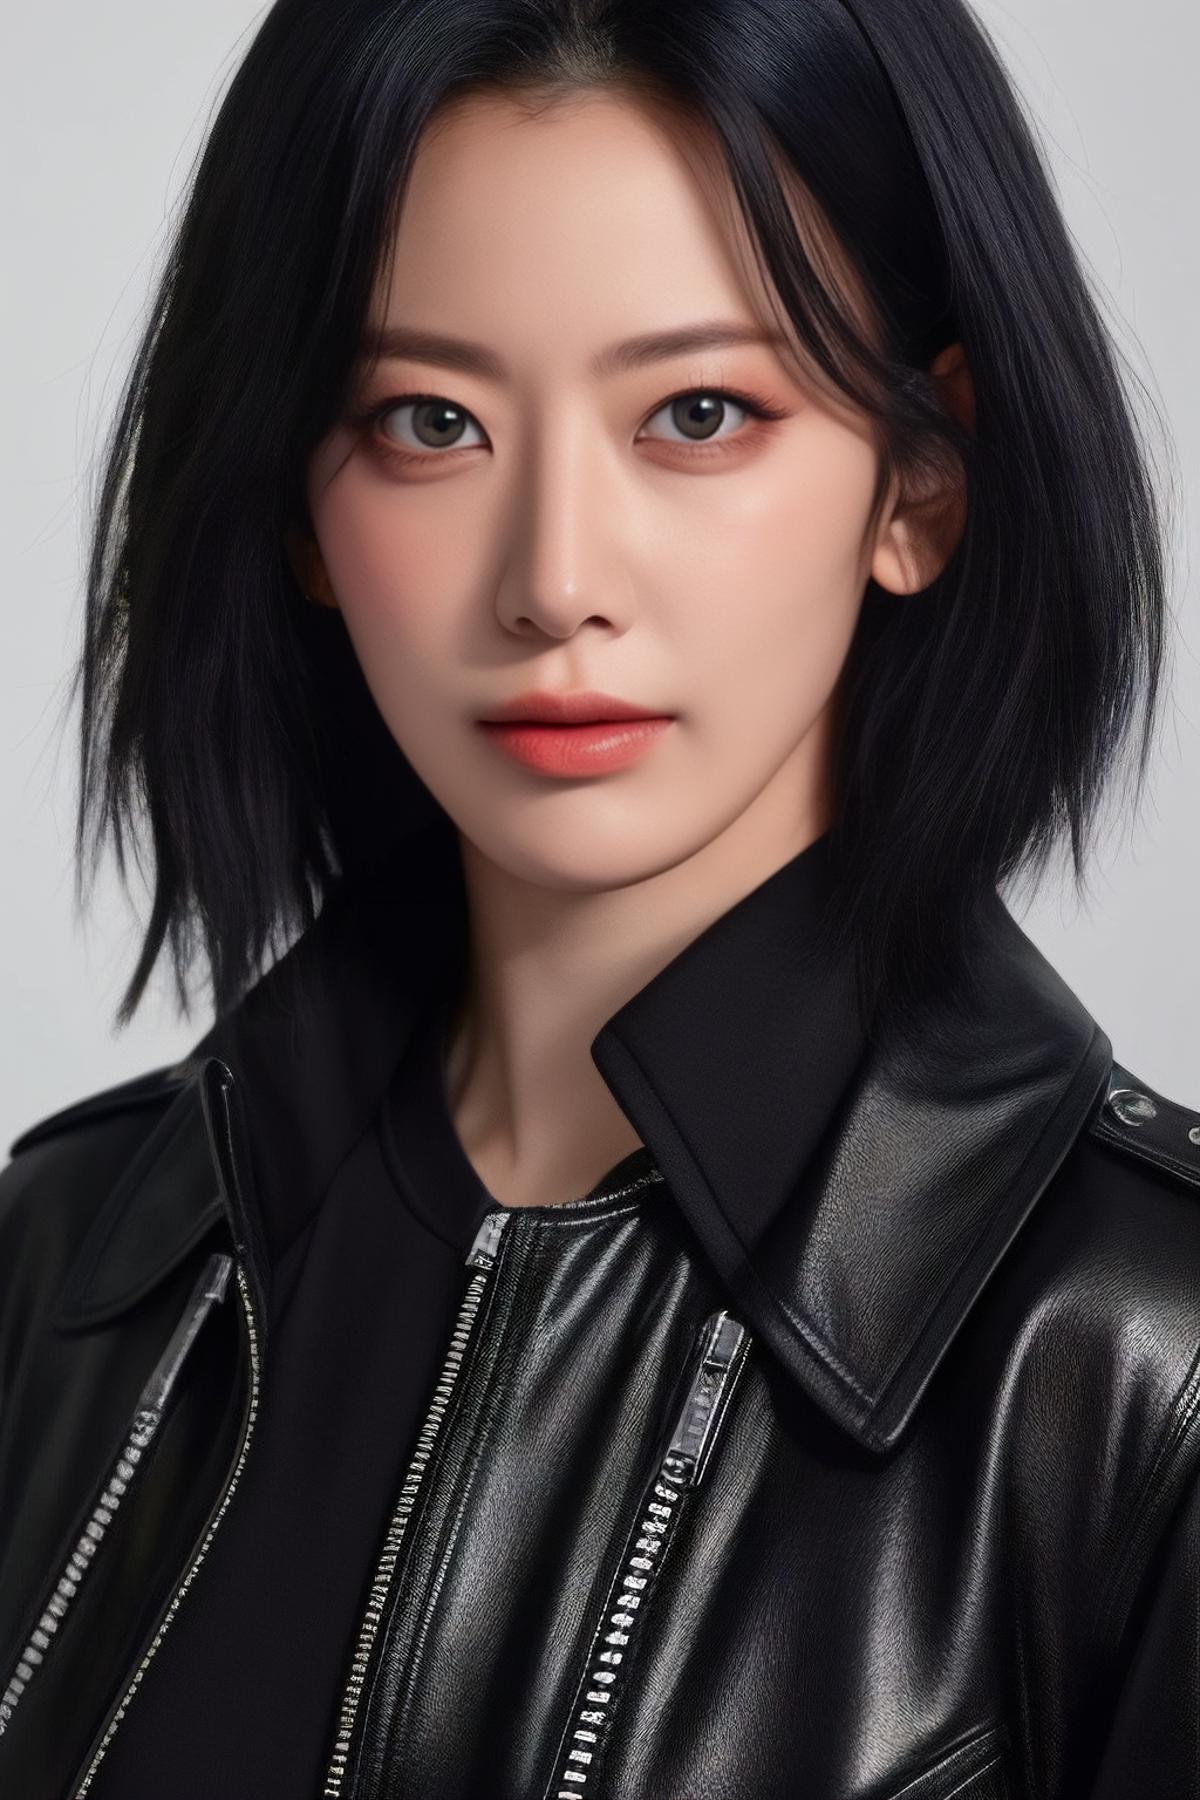 AI model image by lun4